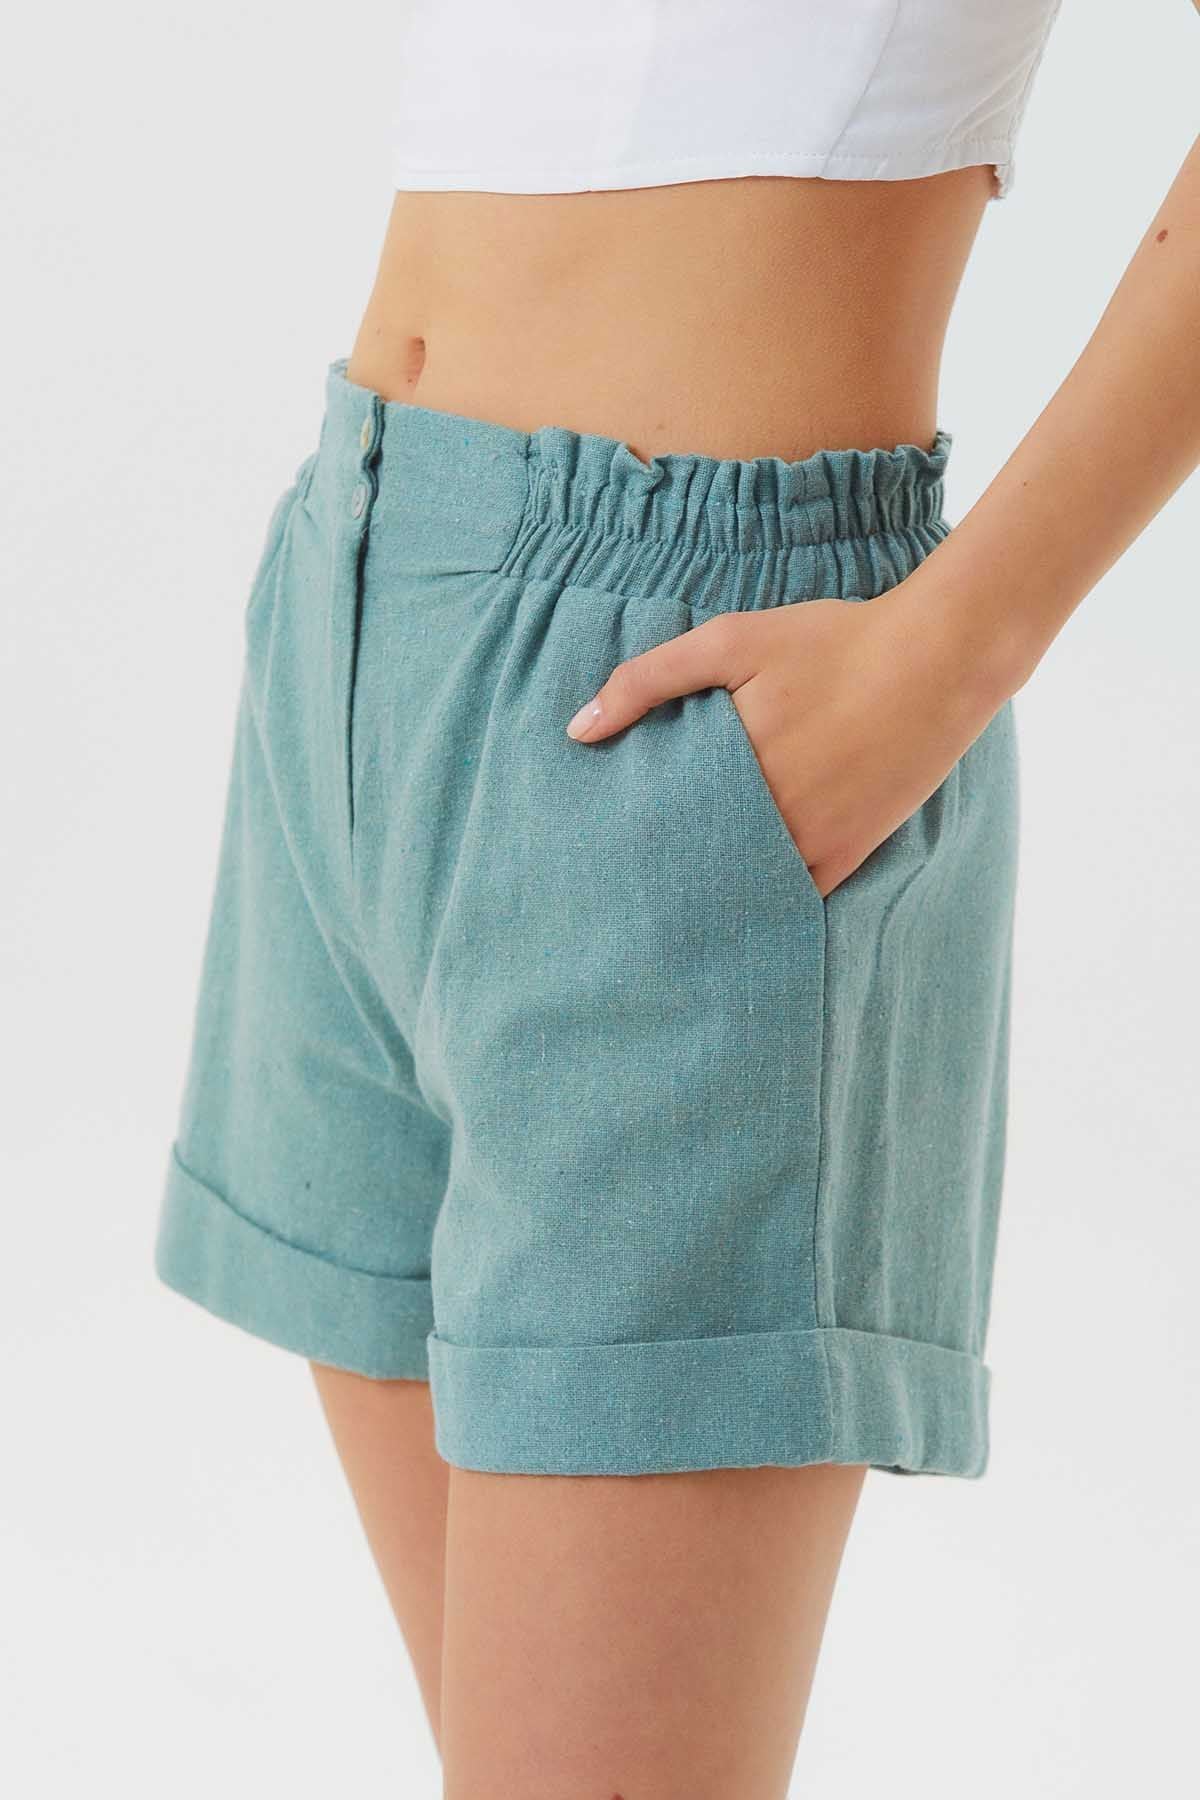 Elastic Side Cotton Women's Shorts Teal